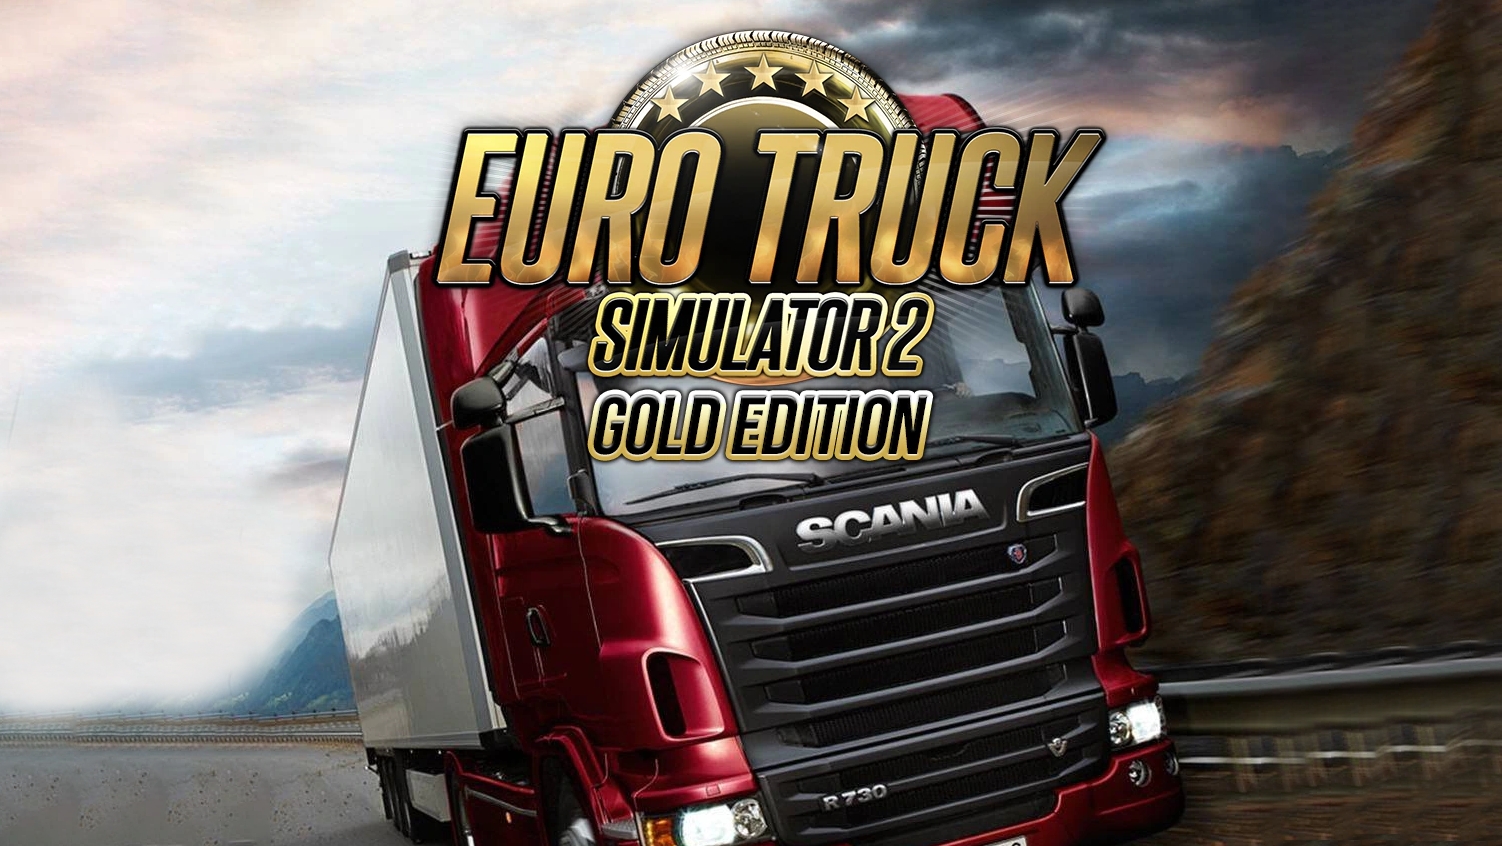 https://gaming-cdn.com/images/products/2309/orig/euro-truck-simulator-2-gold-edition-gold-edition-pc-mac-spiel-steam-cover.jpg?v=1699955287